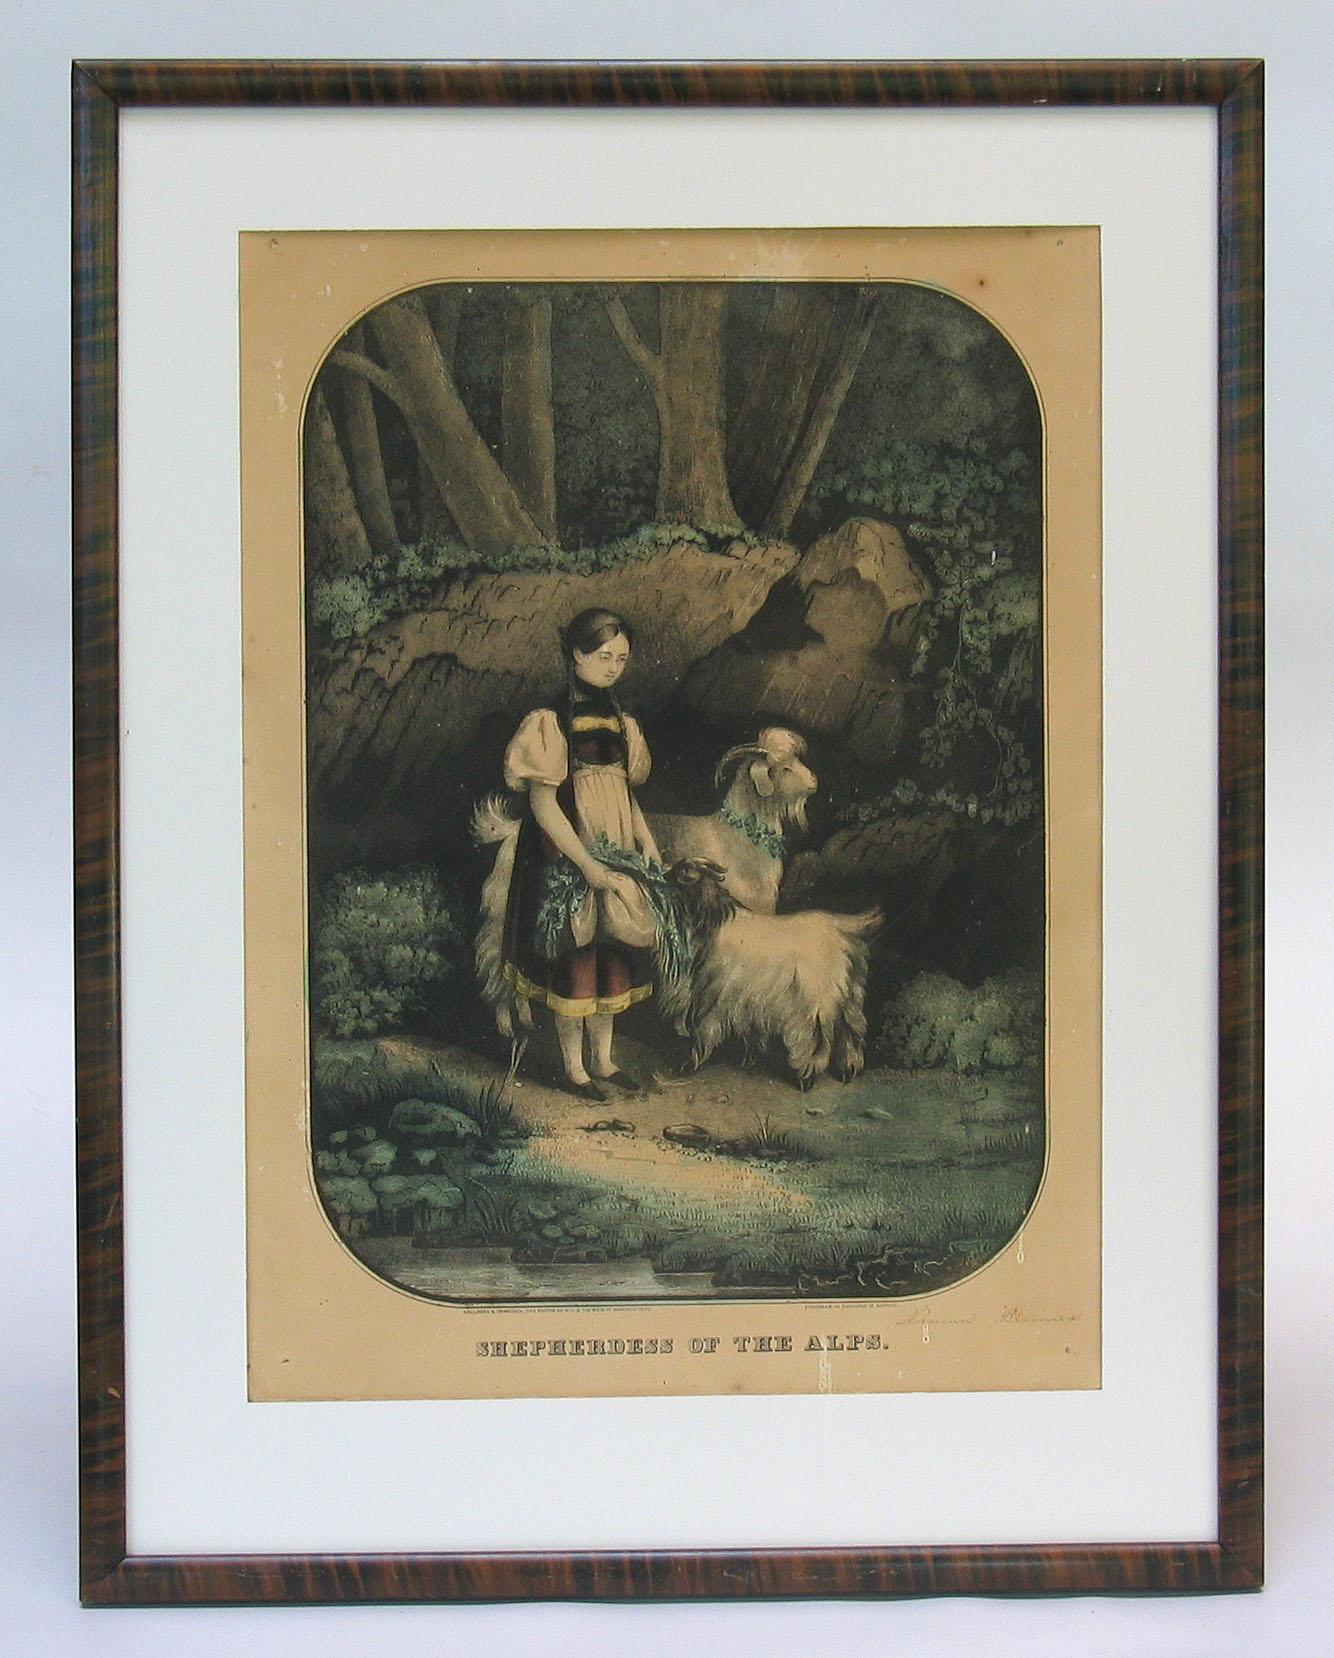 American Classical Original Kellogg & Comstock Hand-Colored Lithograph 'Shepherdess of the Alps' For Sale